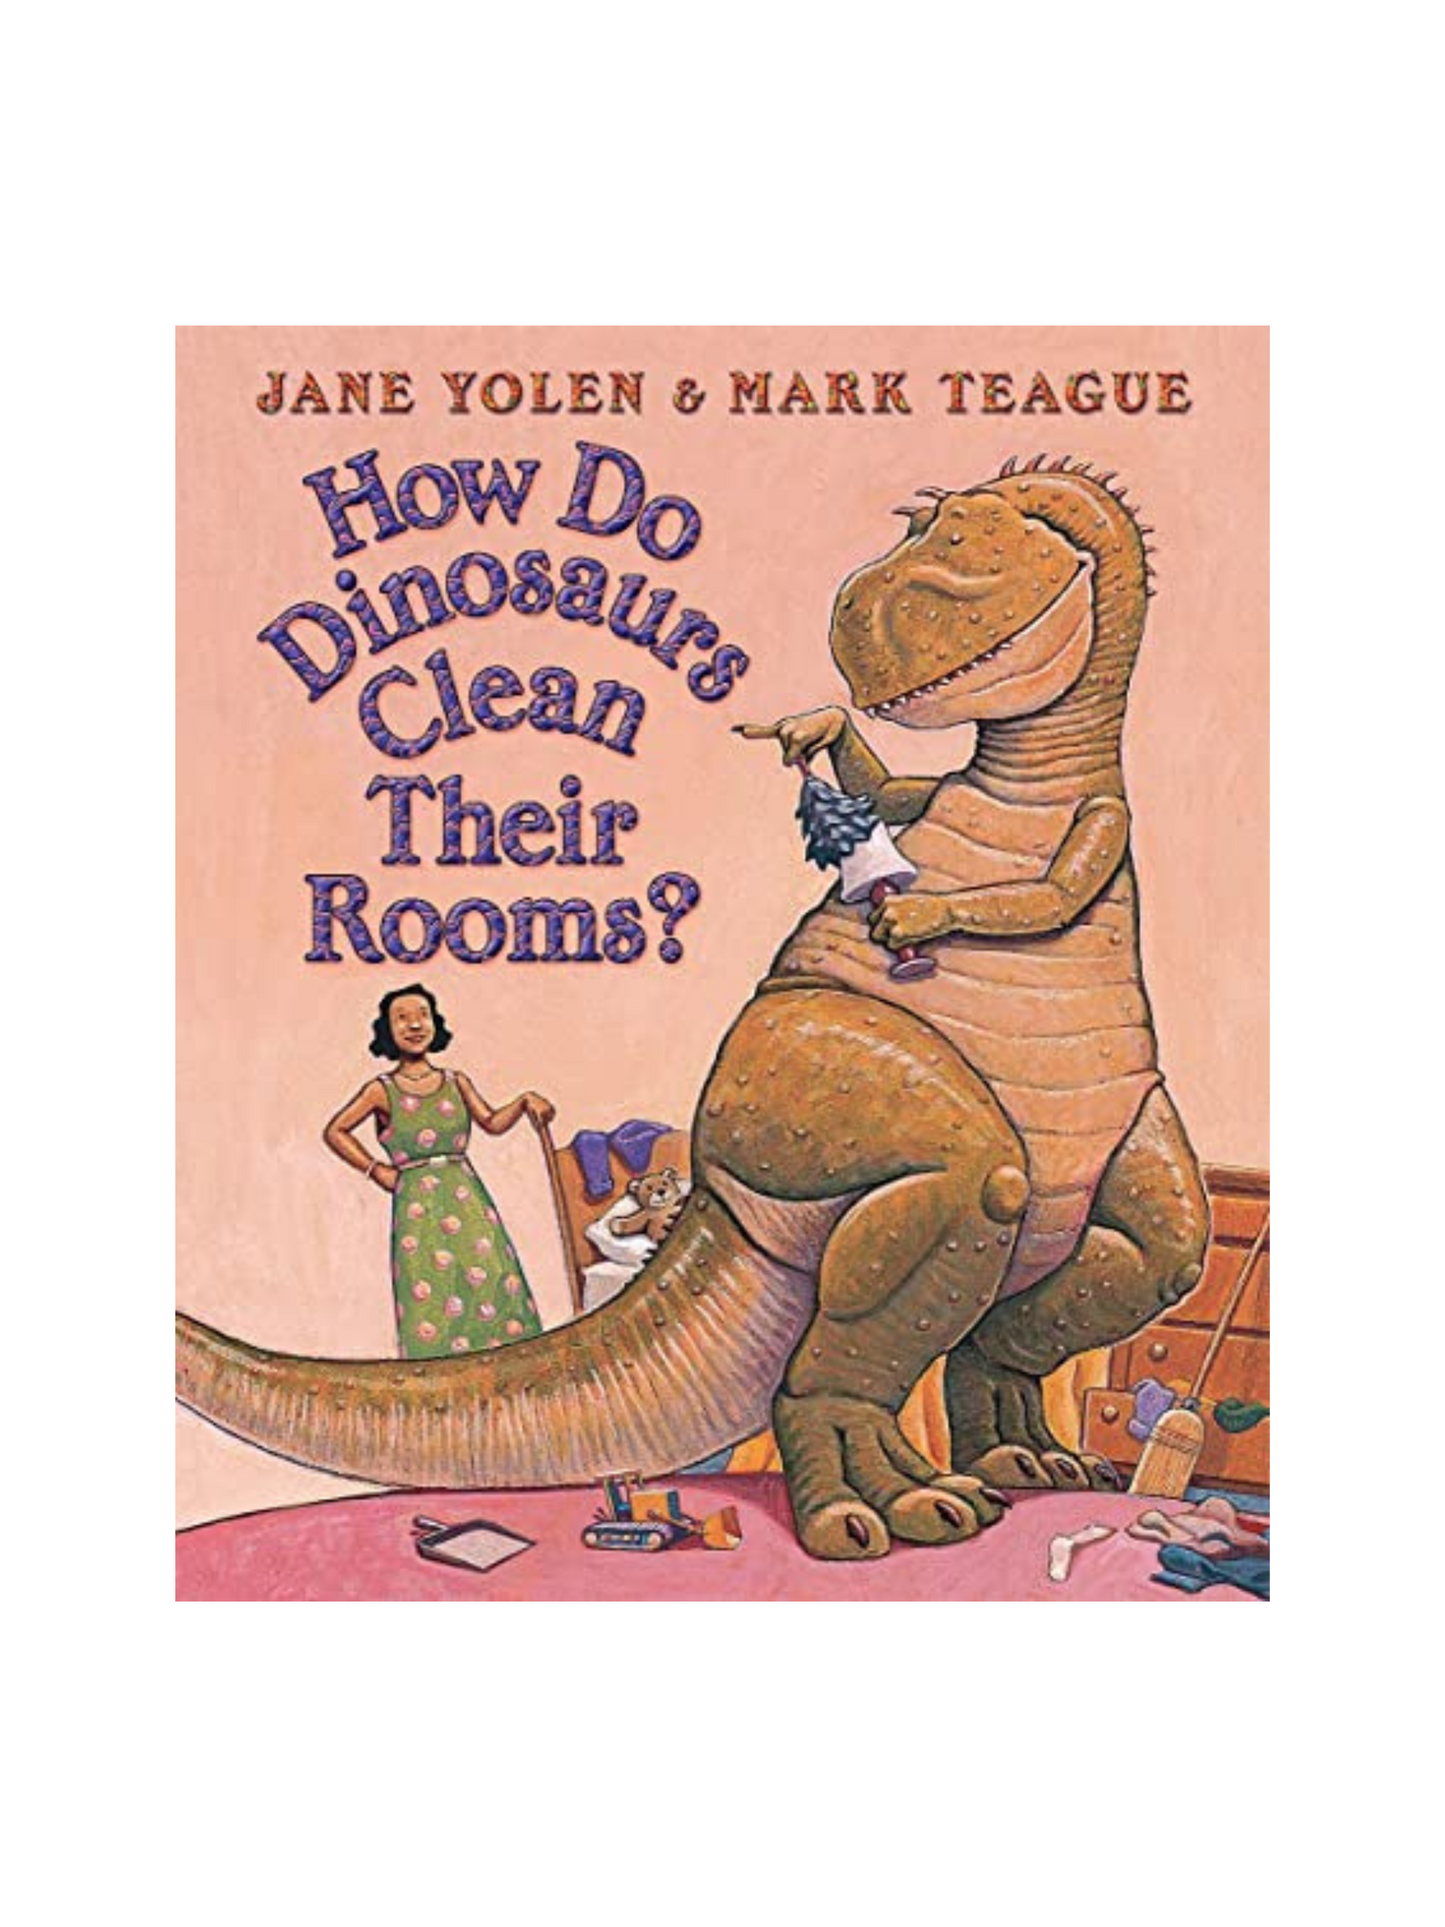 HOW DO DINOSAURS CLEAN THEIR ROOMS? BOOK - THE LITTLE EAGLE BOUTIQUE